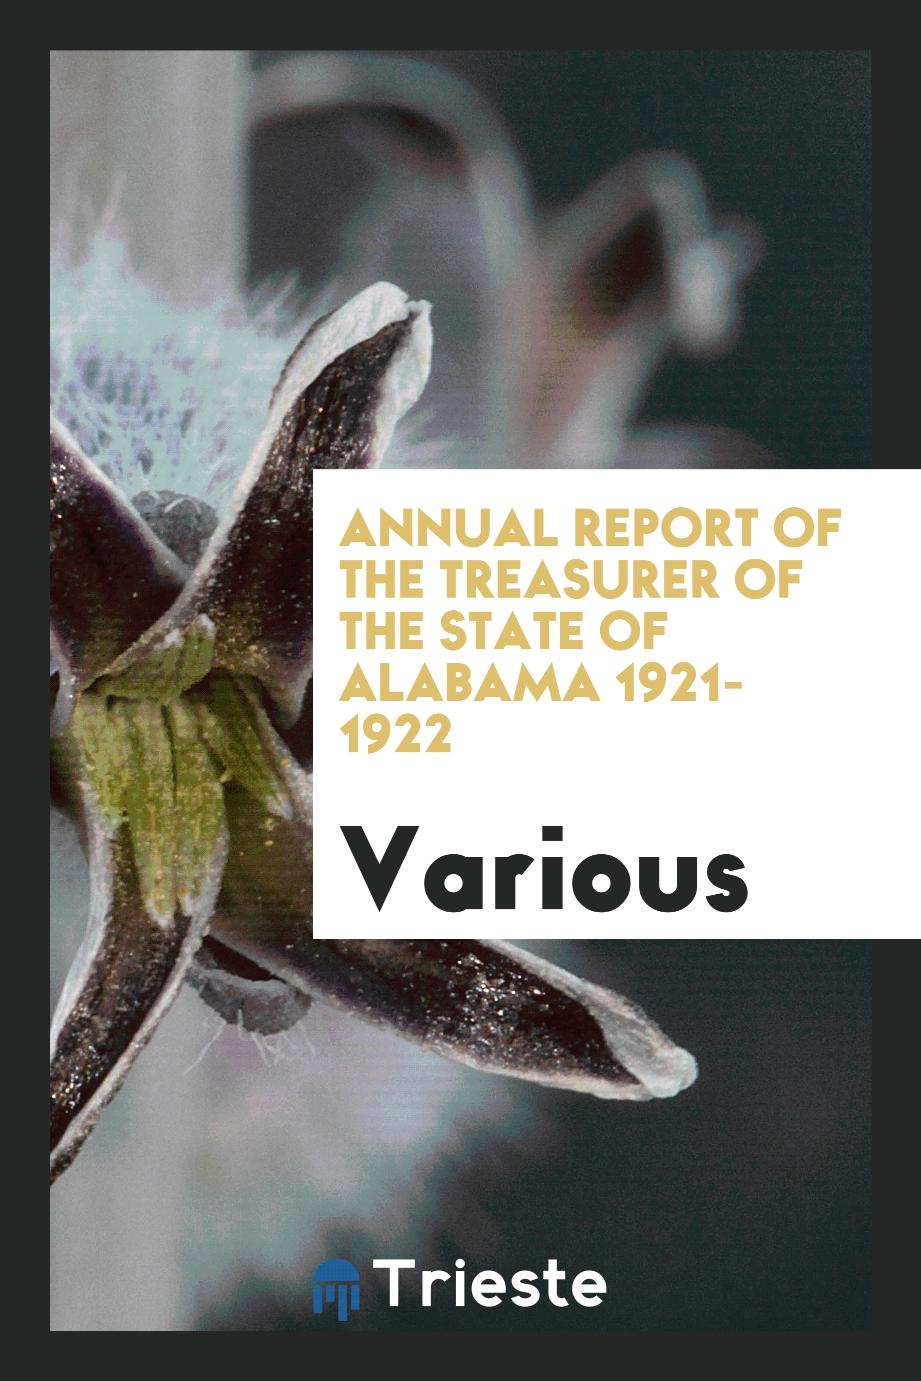 Annual Report of the Treasurer of the State of Alabama 1921-1922